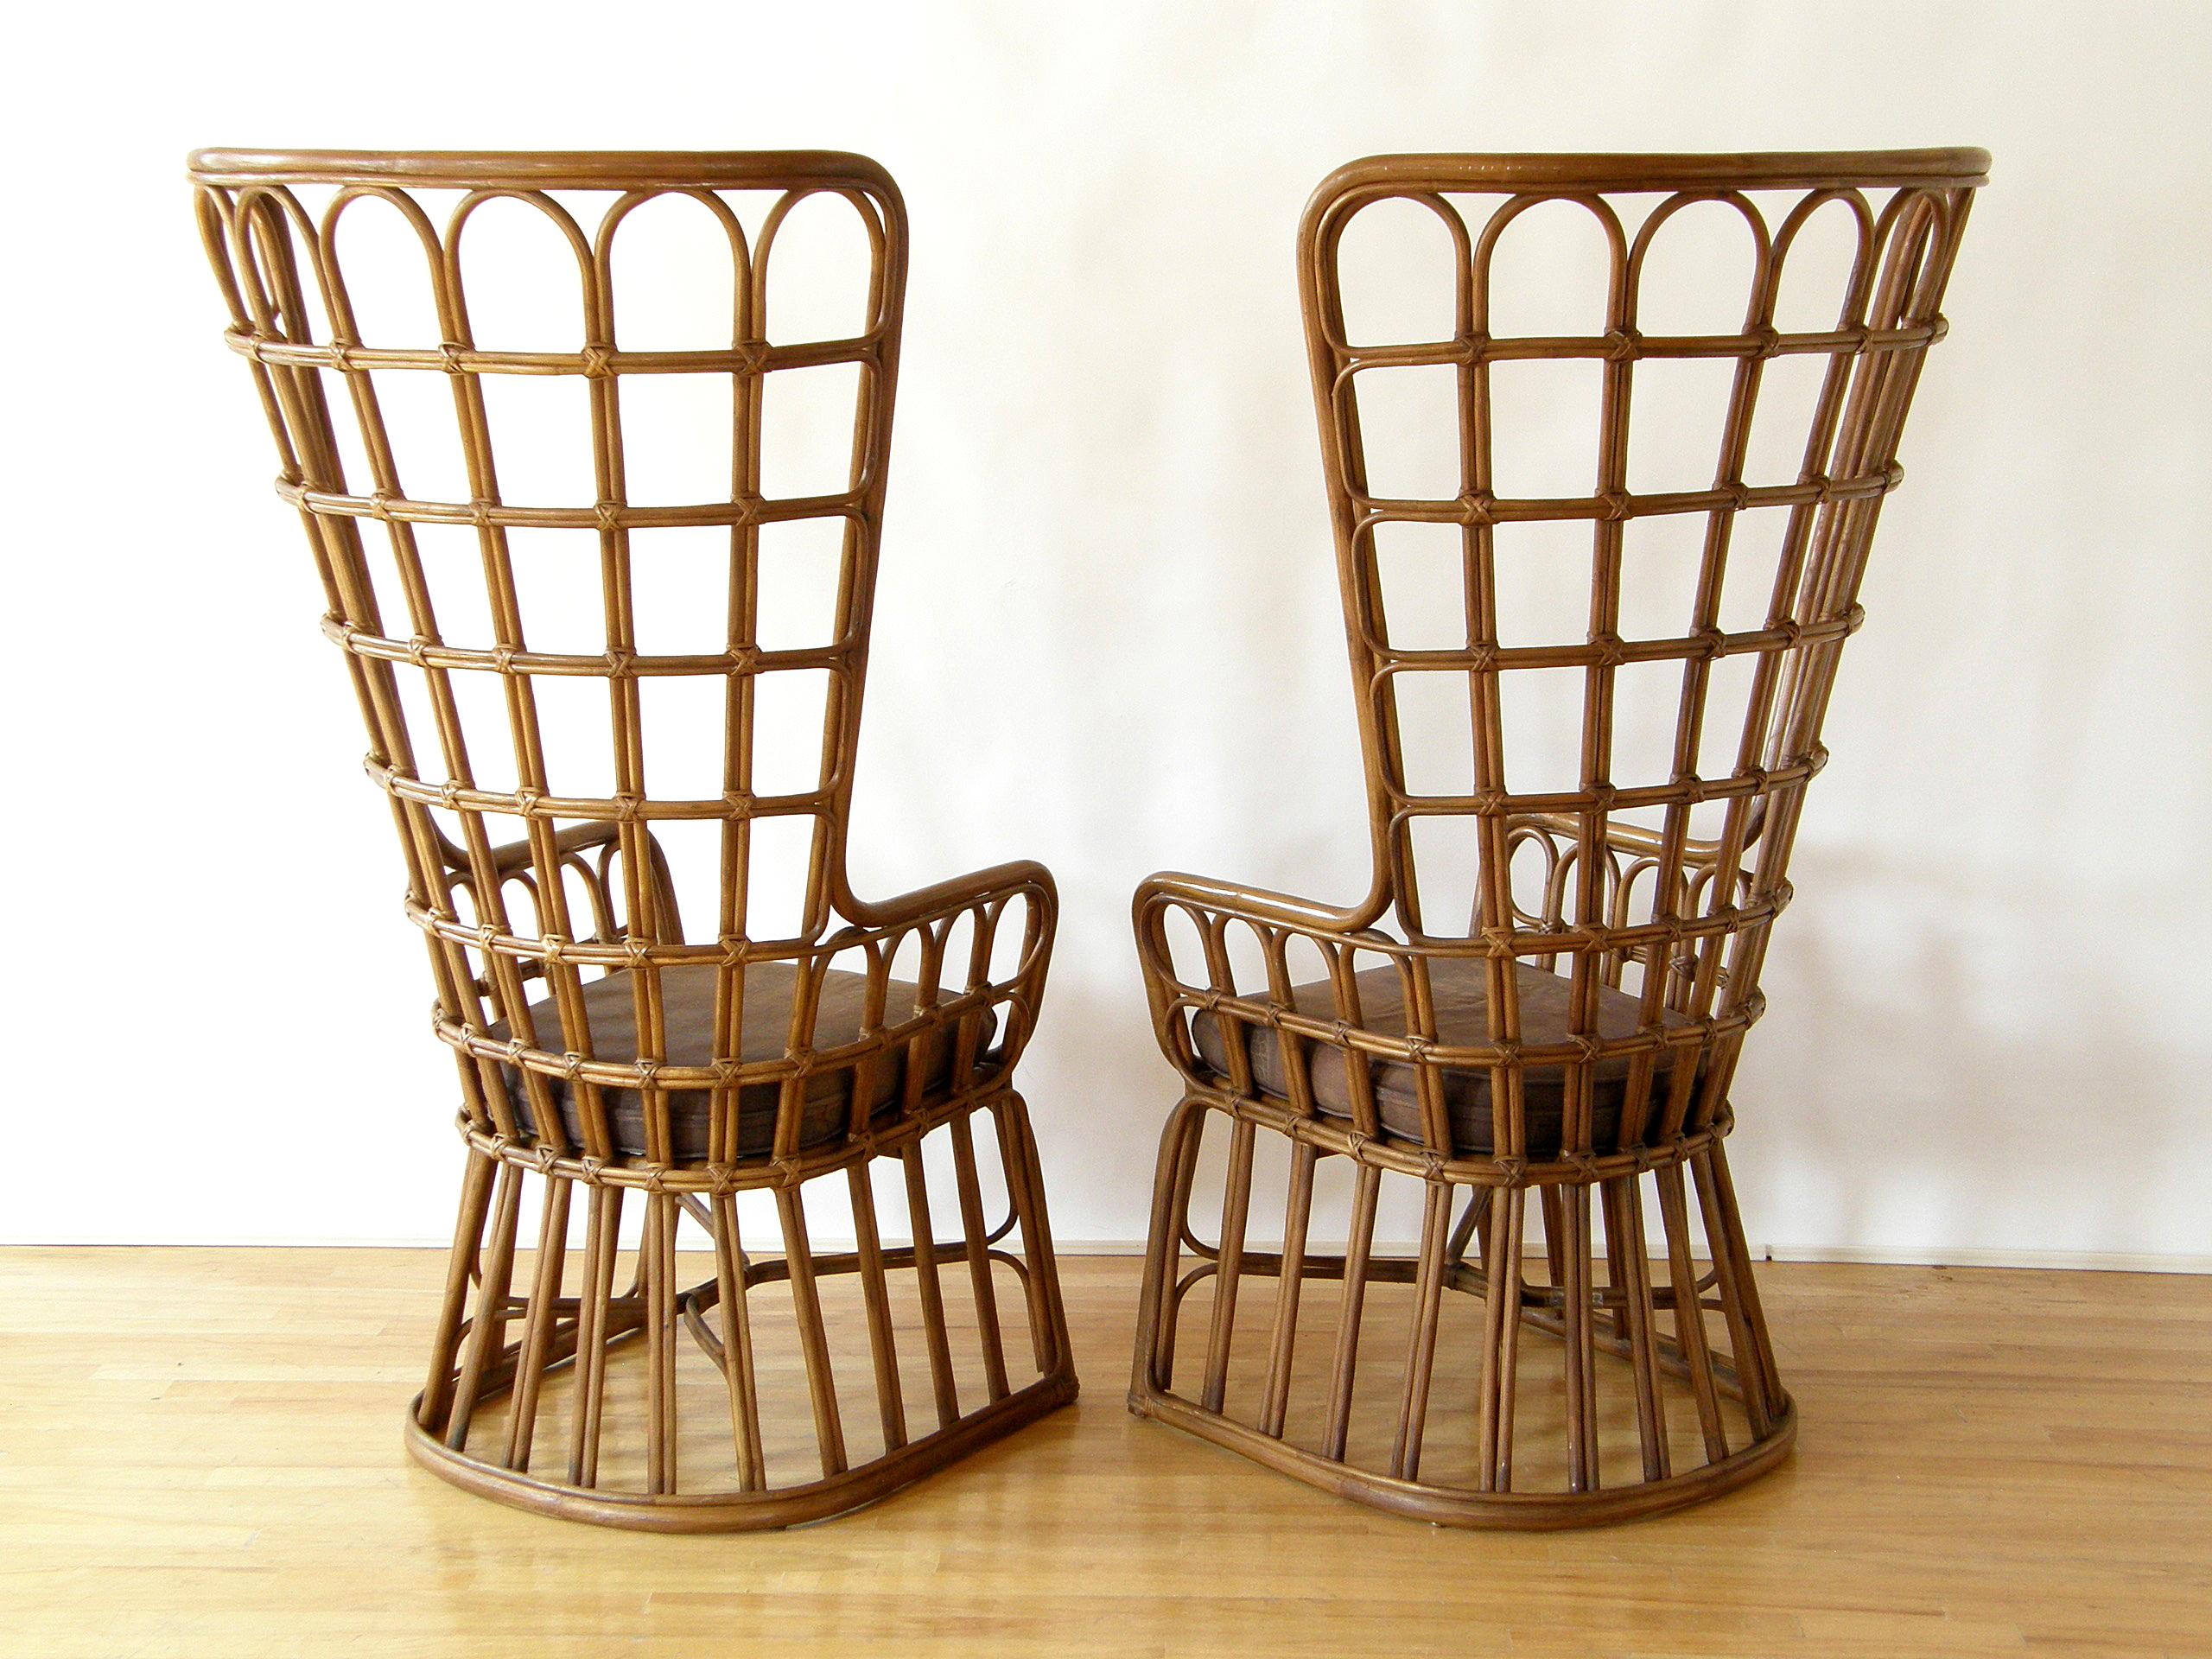 Late 20th Century Pair of Rattan Peacock Fan Chairs with High Backs and Upholstered Cushions